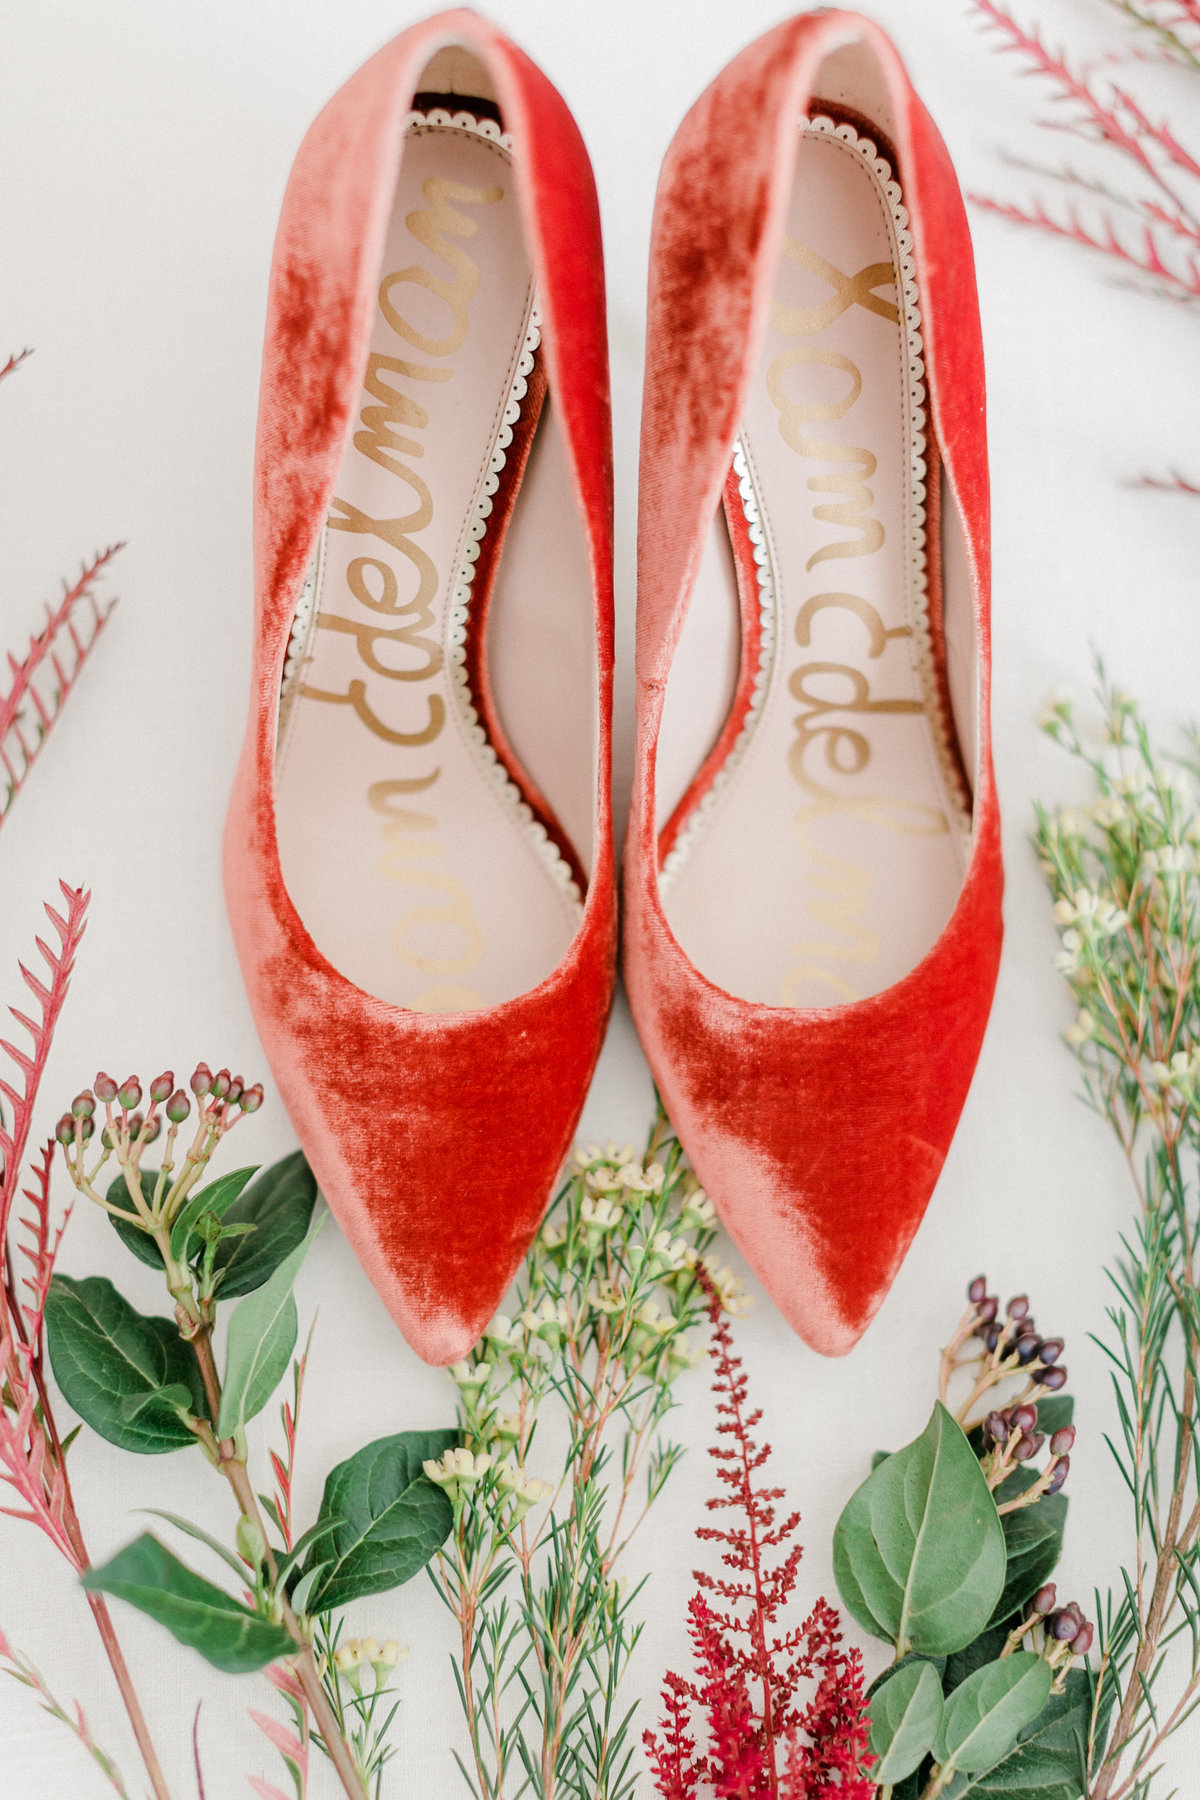 Detailed photo of bride's shoes with selected flowers